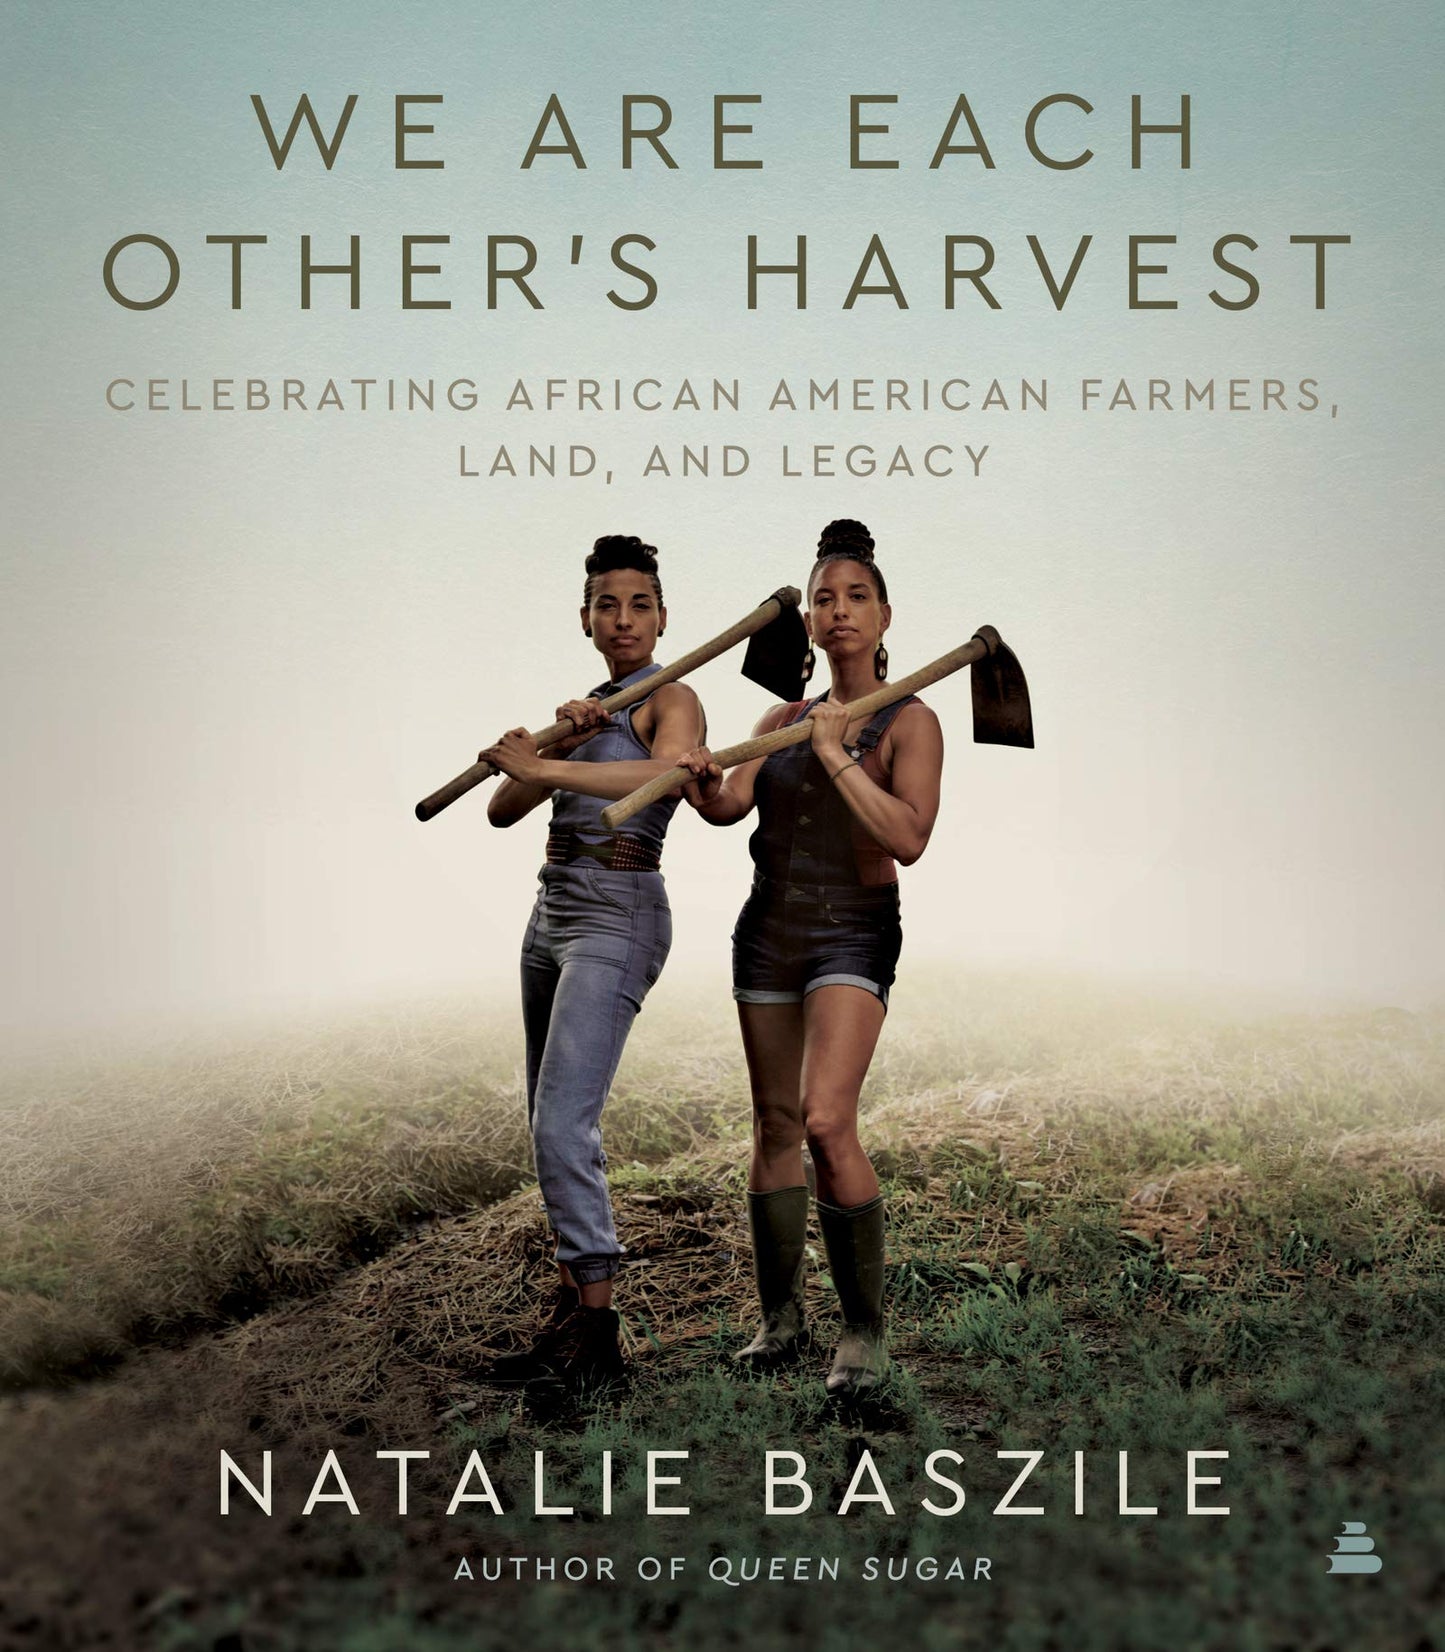 We Are Each Other's Harvest // Celebrating African American Farmers, Land, and Legacy